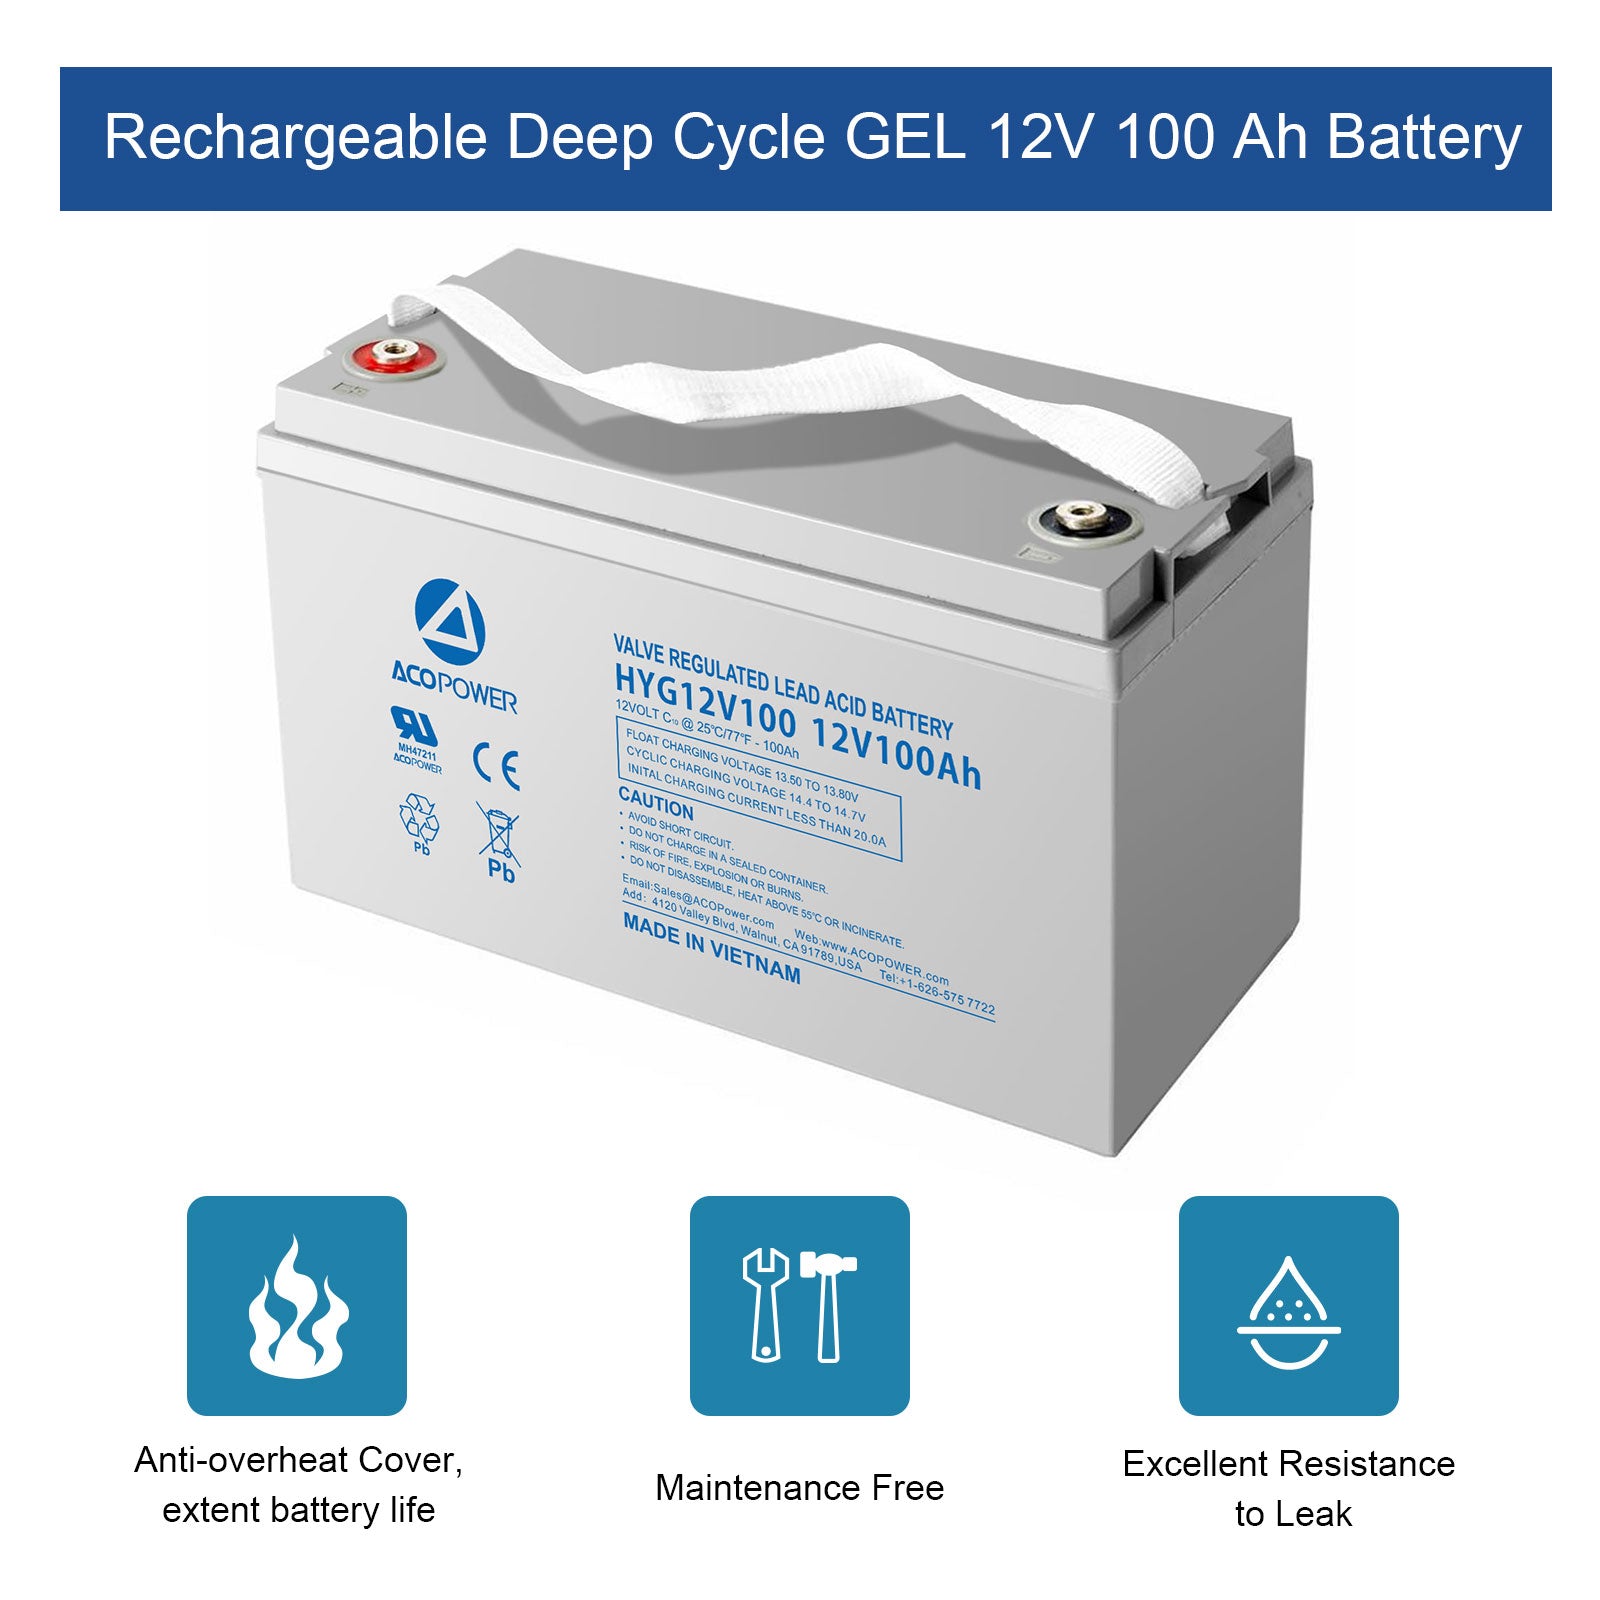 12-100Ah Rechargeable Gel Deep Cycle 12V 100 Ah Battery with Button Style Terminals